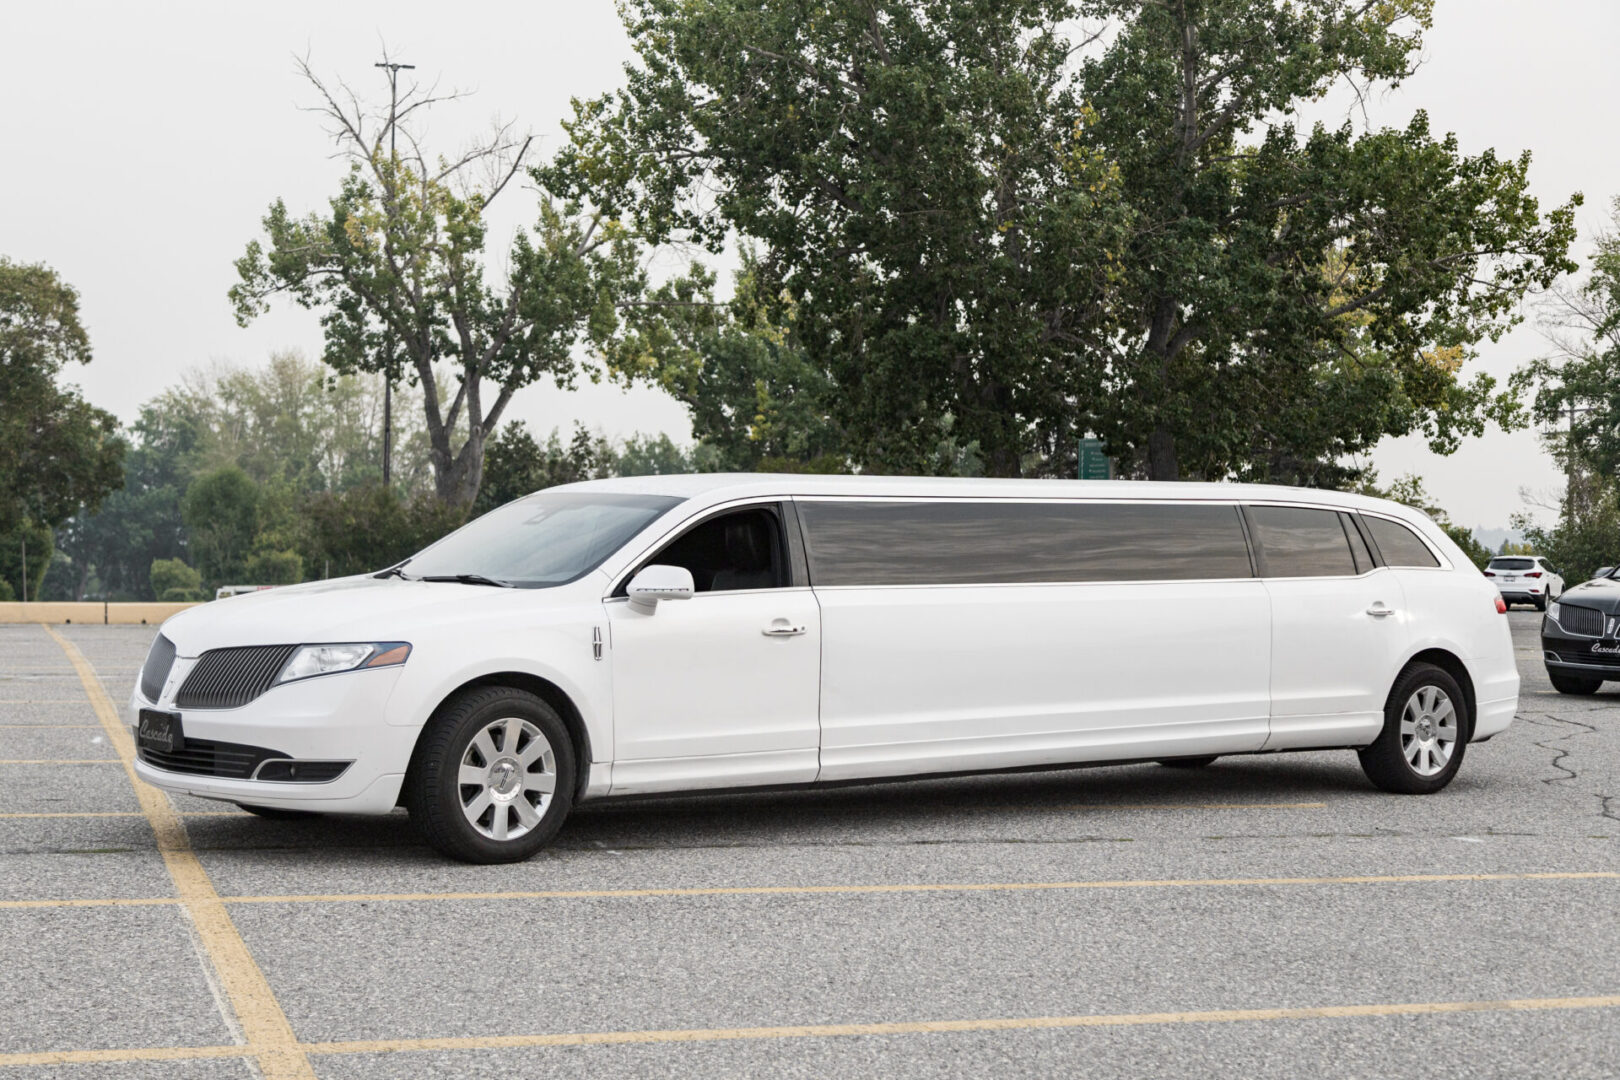 A white limo is parked on the side of the road.